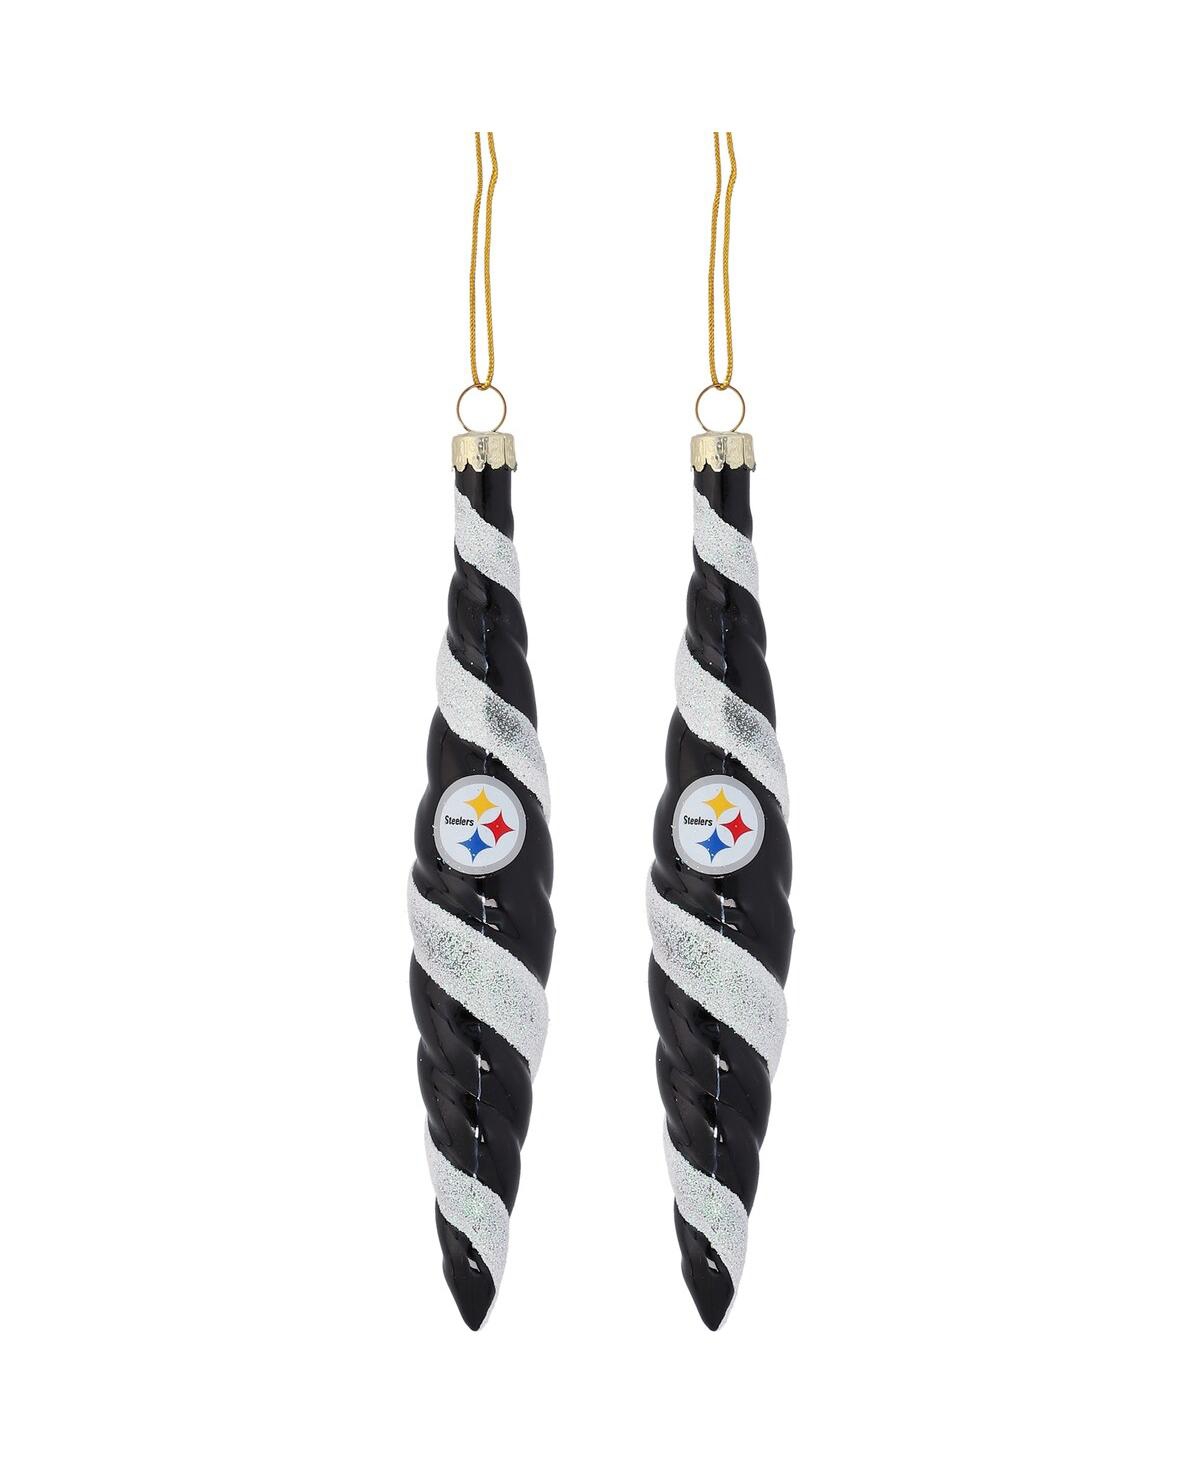 Memory Company Pittsburgh Steelers Two-pack Swirl Blown Glass Ornament Set In Black,white